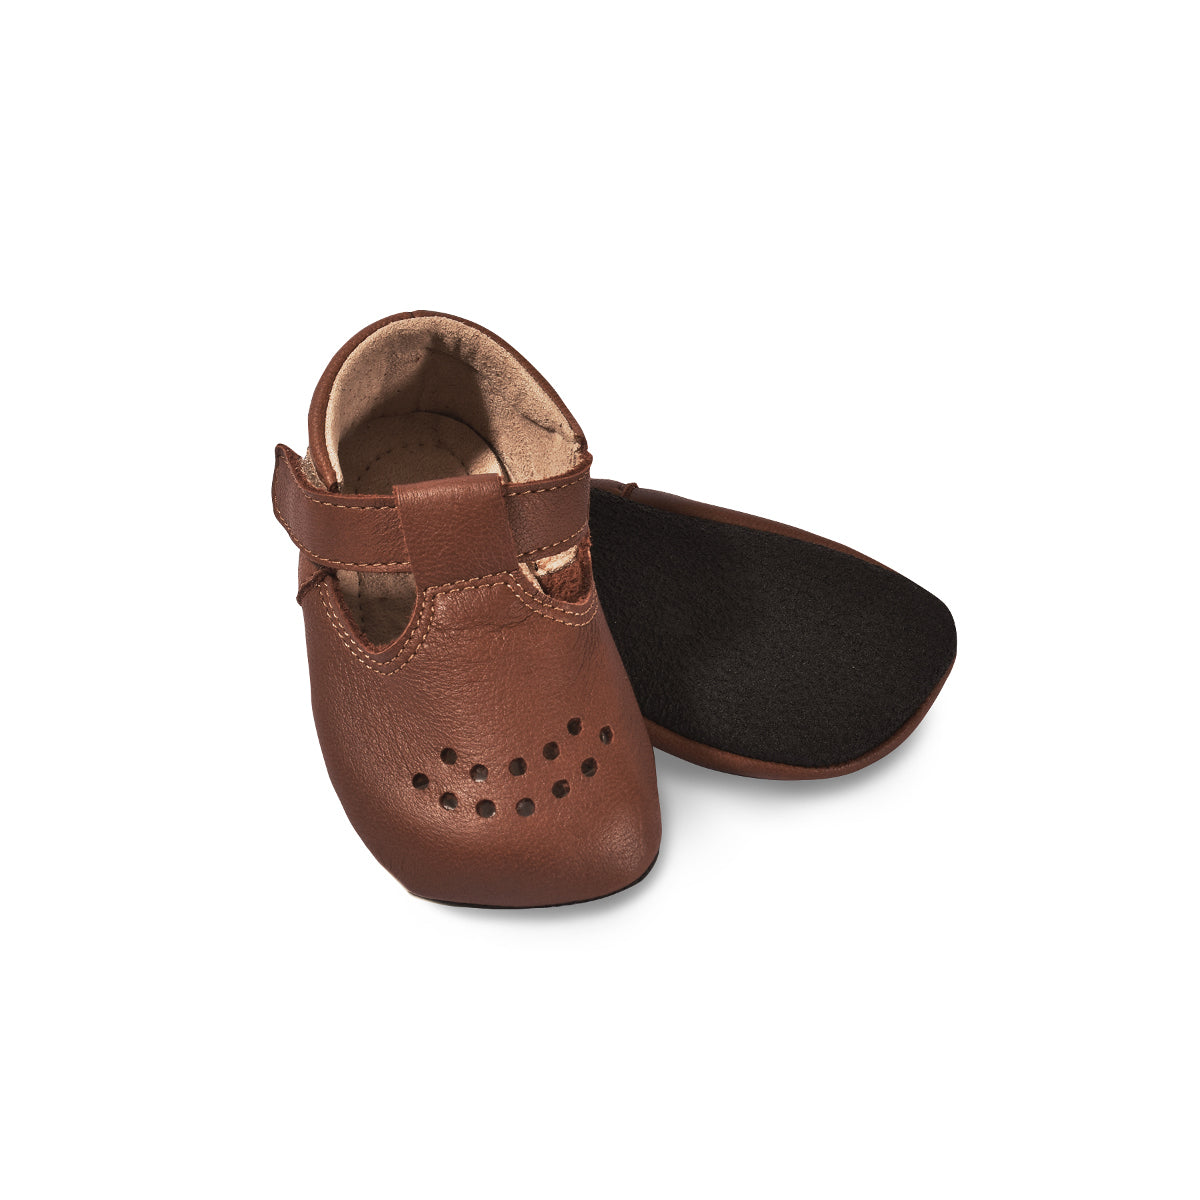 LUSTI. Children slippers made of soft reindeer leather. Color Brown